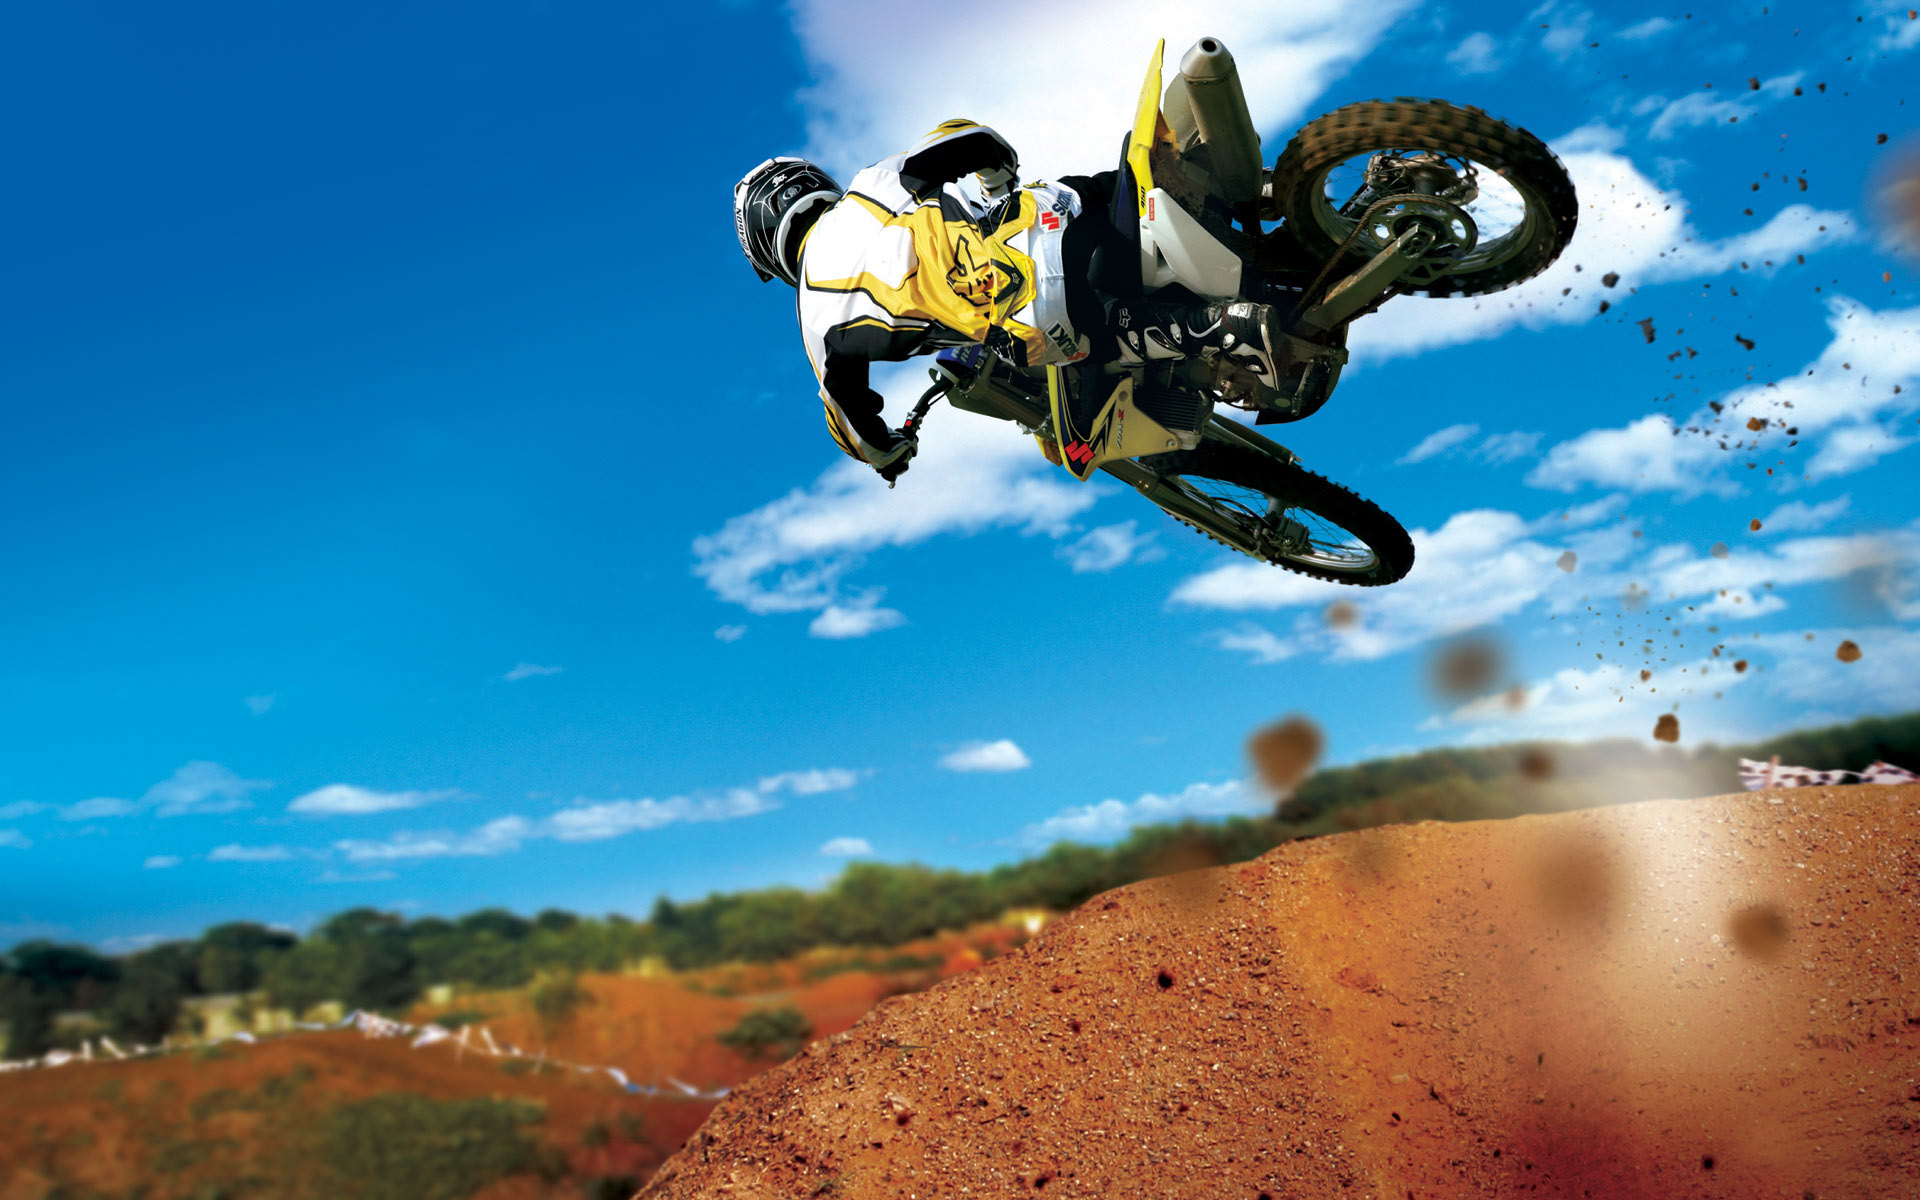 Motorcycle jumping in a motocross event